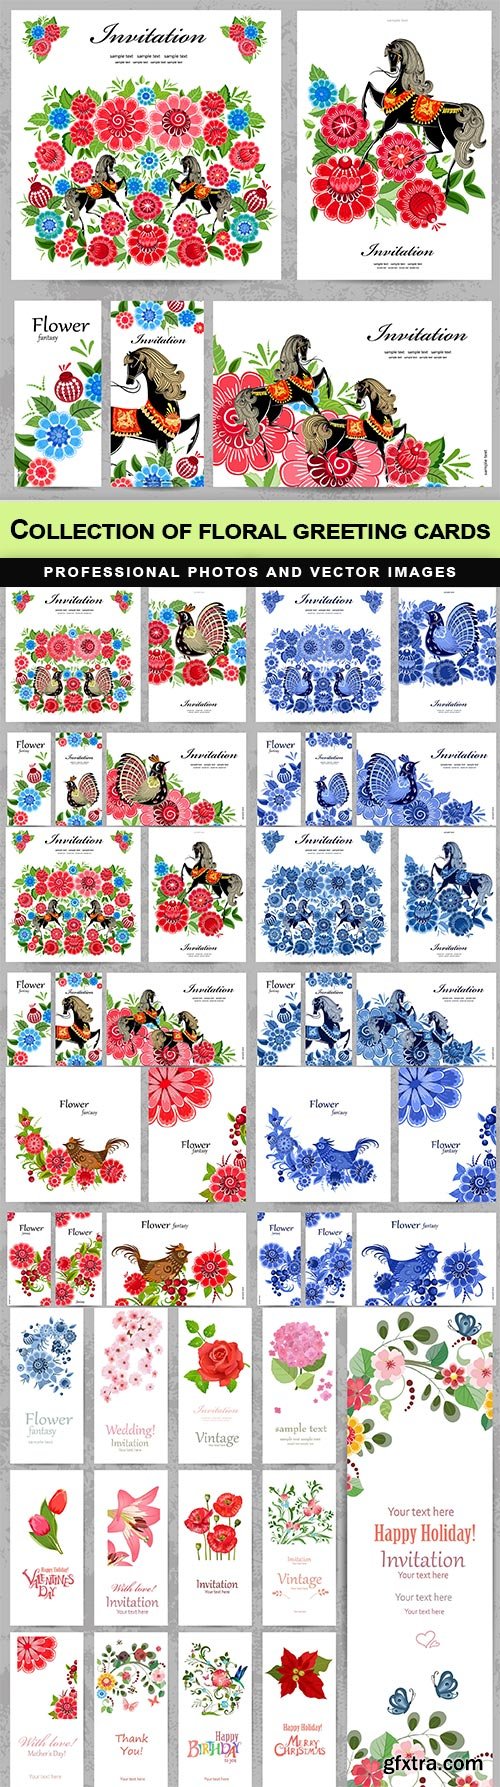 Collection of floral greeting cards - 7 EPS